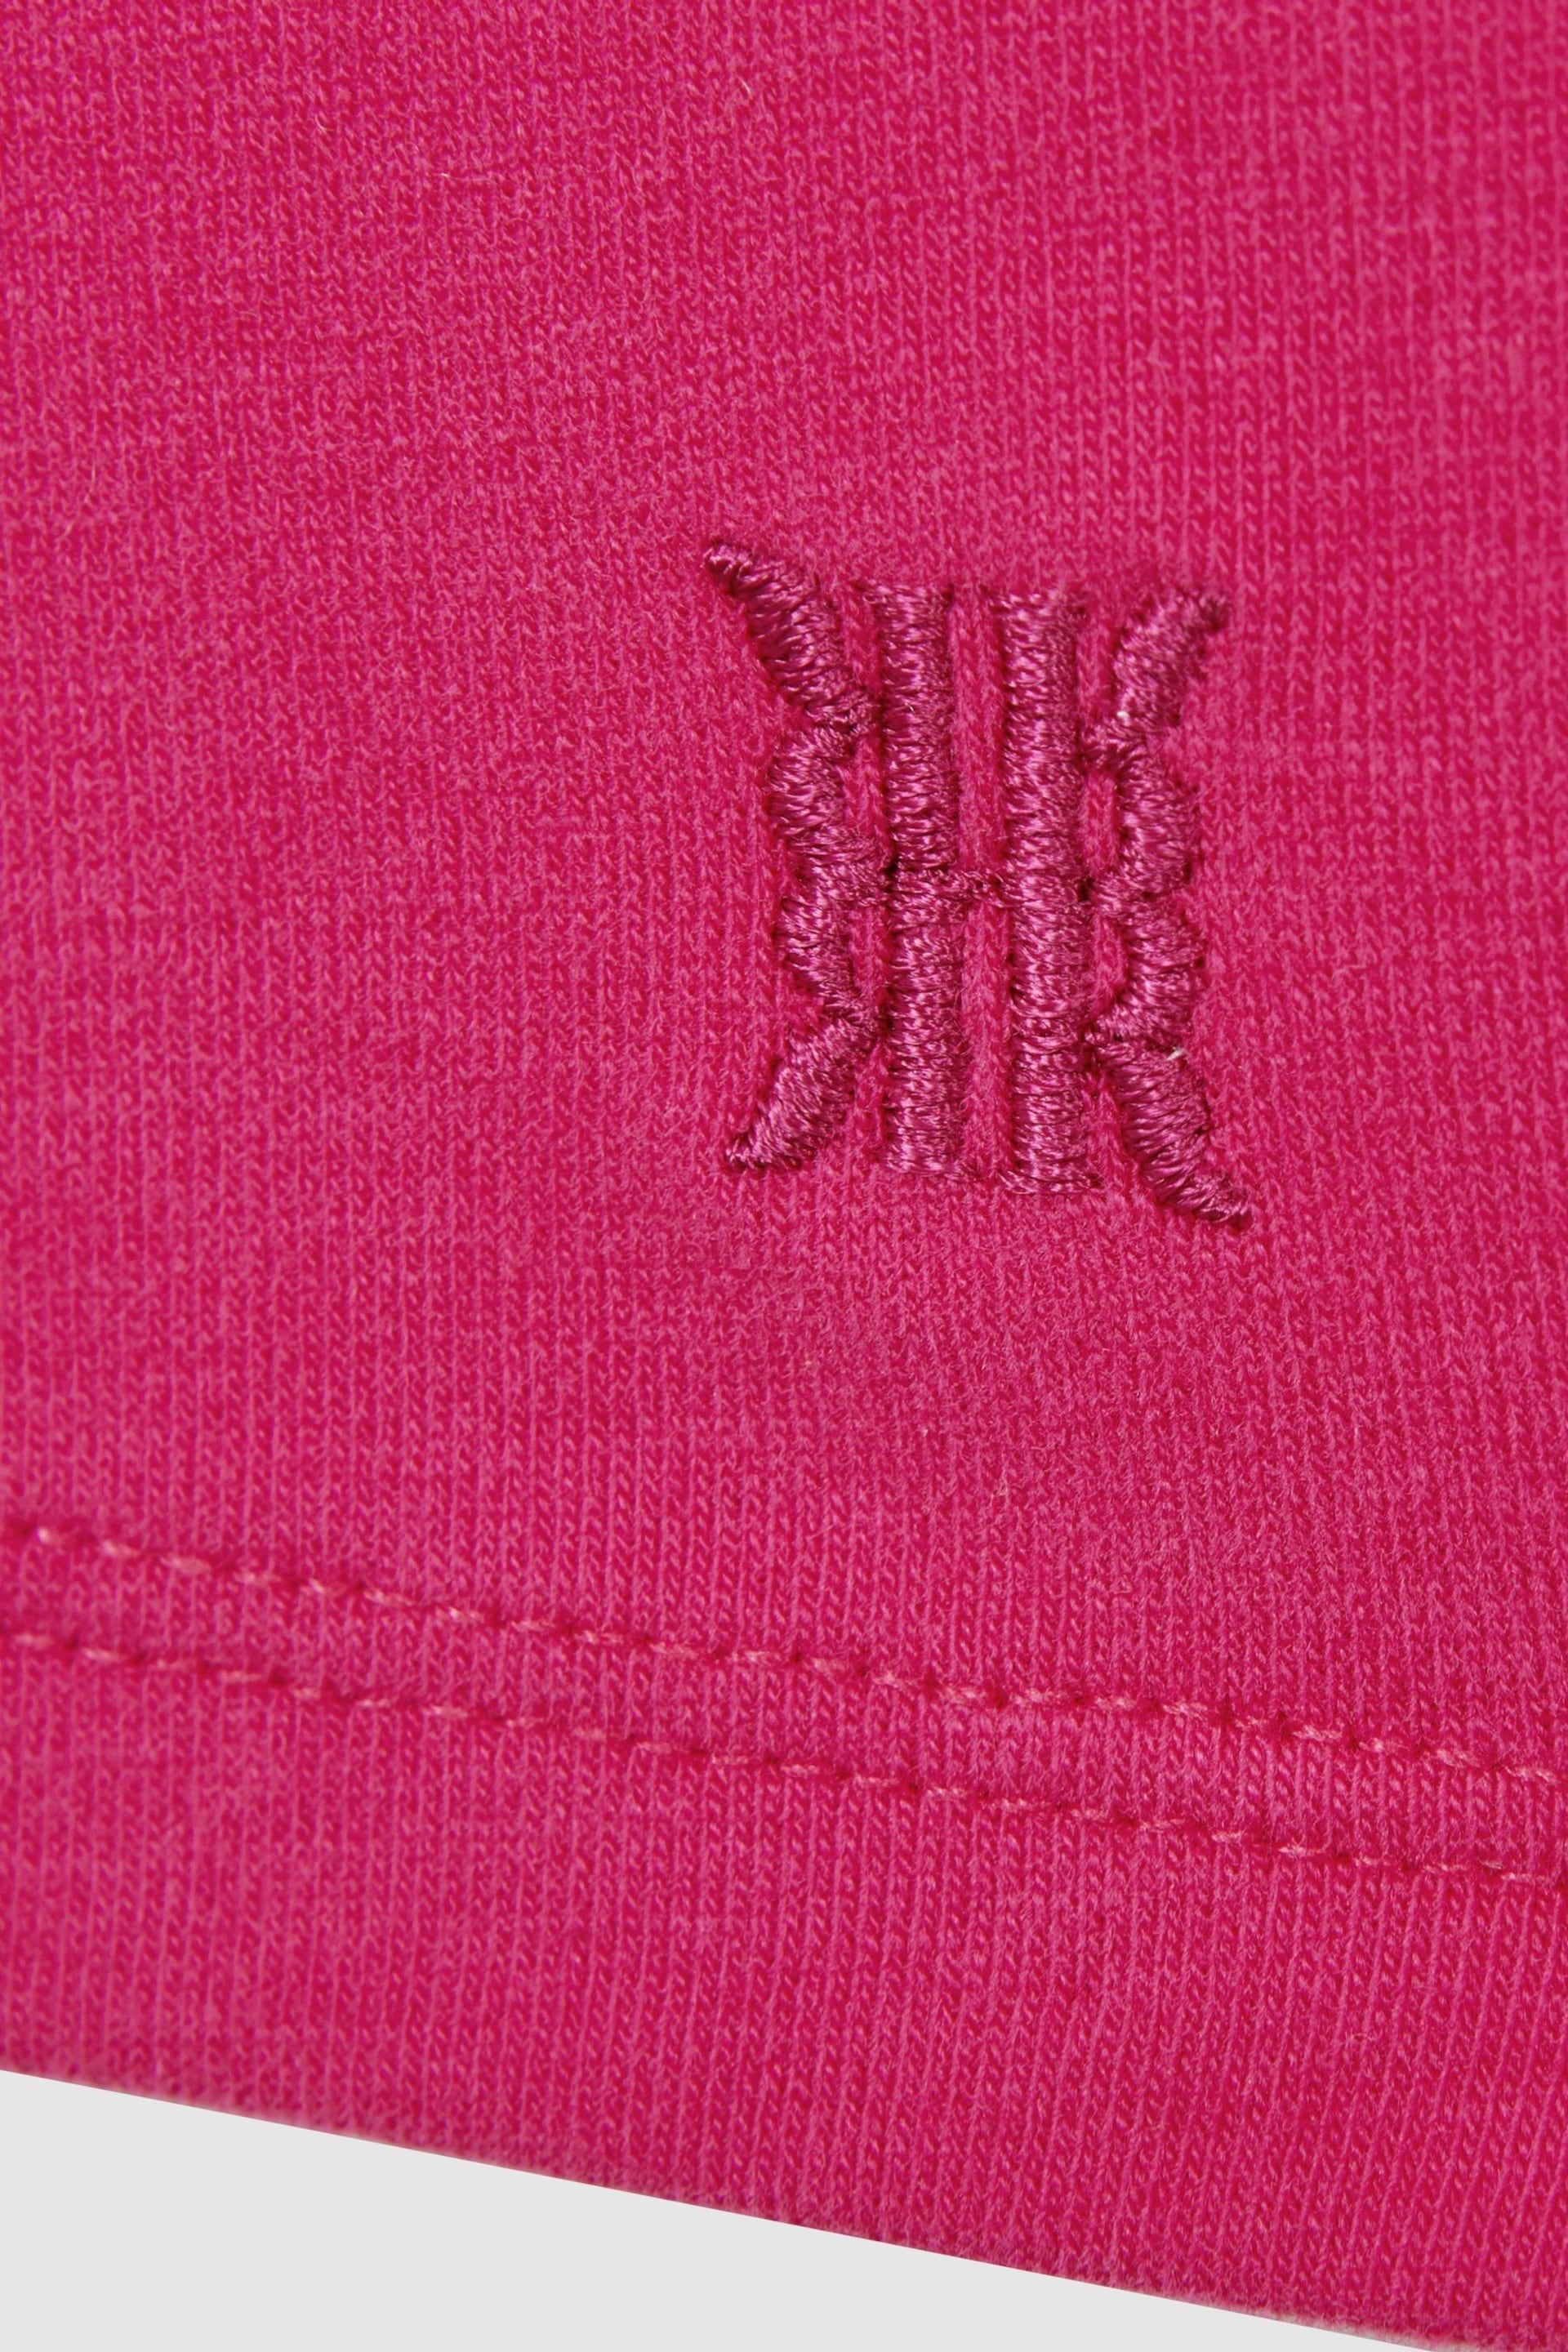 Reiss Bright Pink Carey Junior Cotton Blend Roll Neck Top - Image 5 of 5